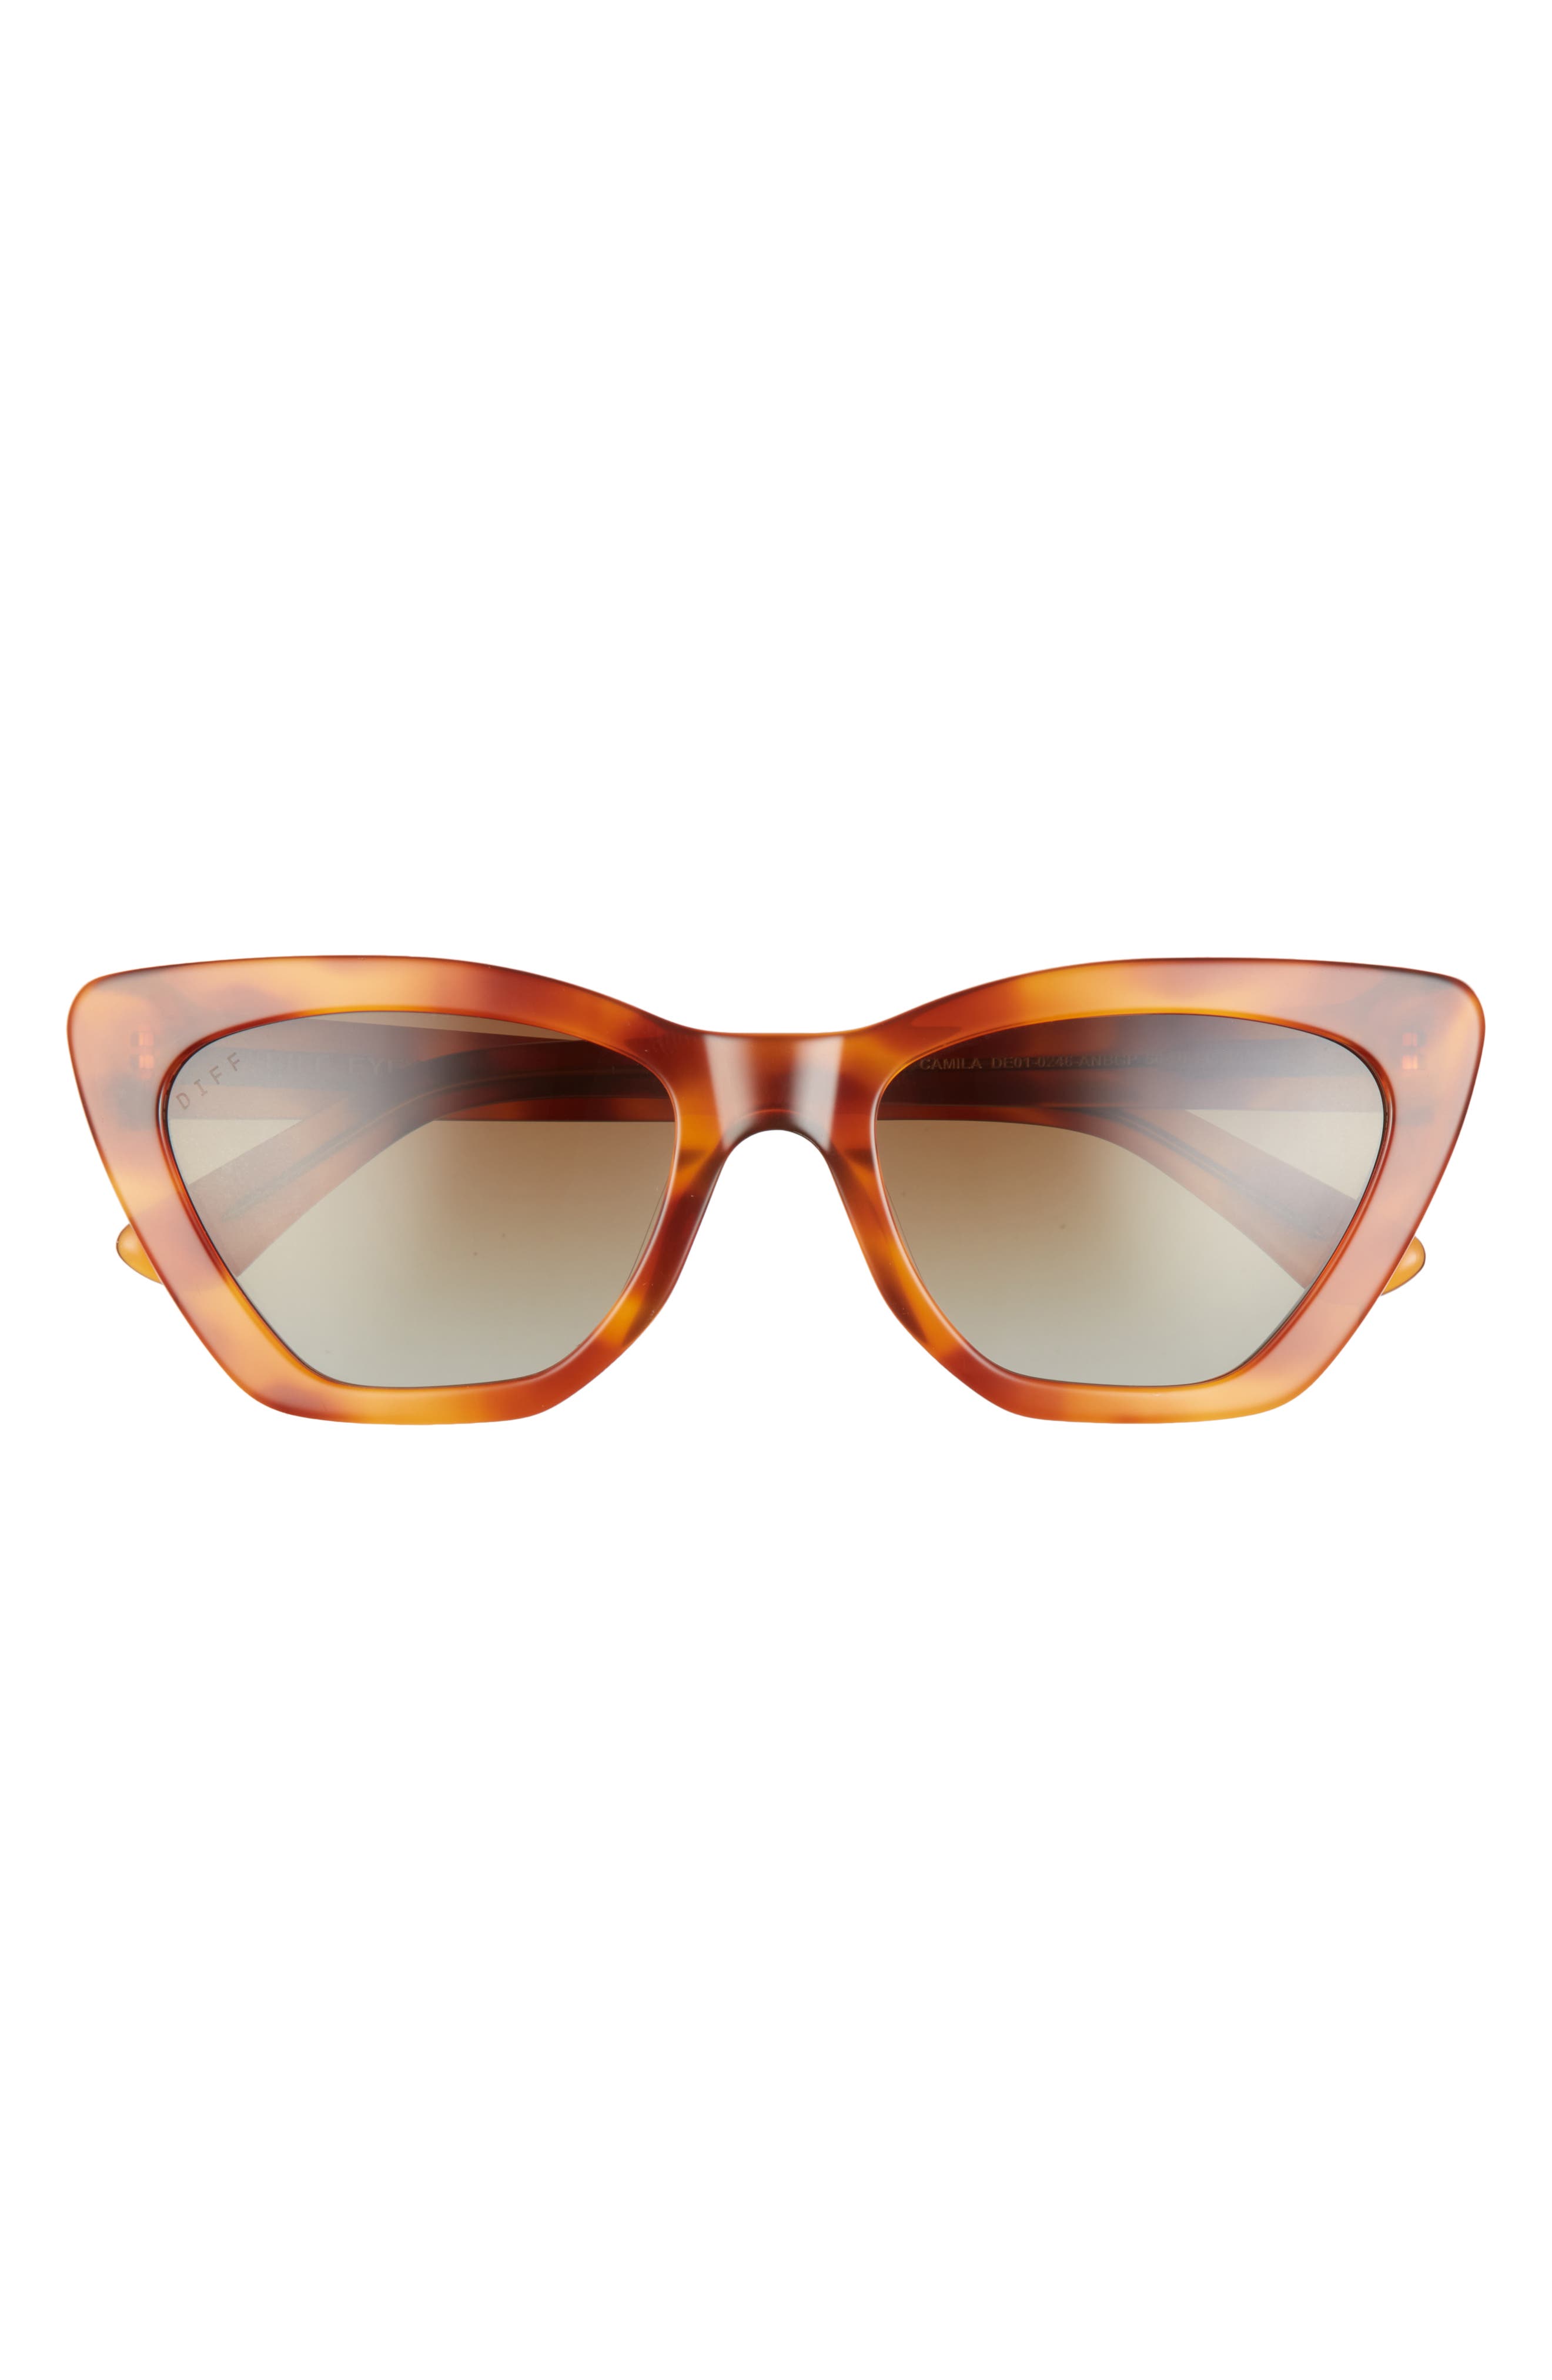 Pdnlds Polarized Sunglasses for Women Brown 